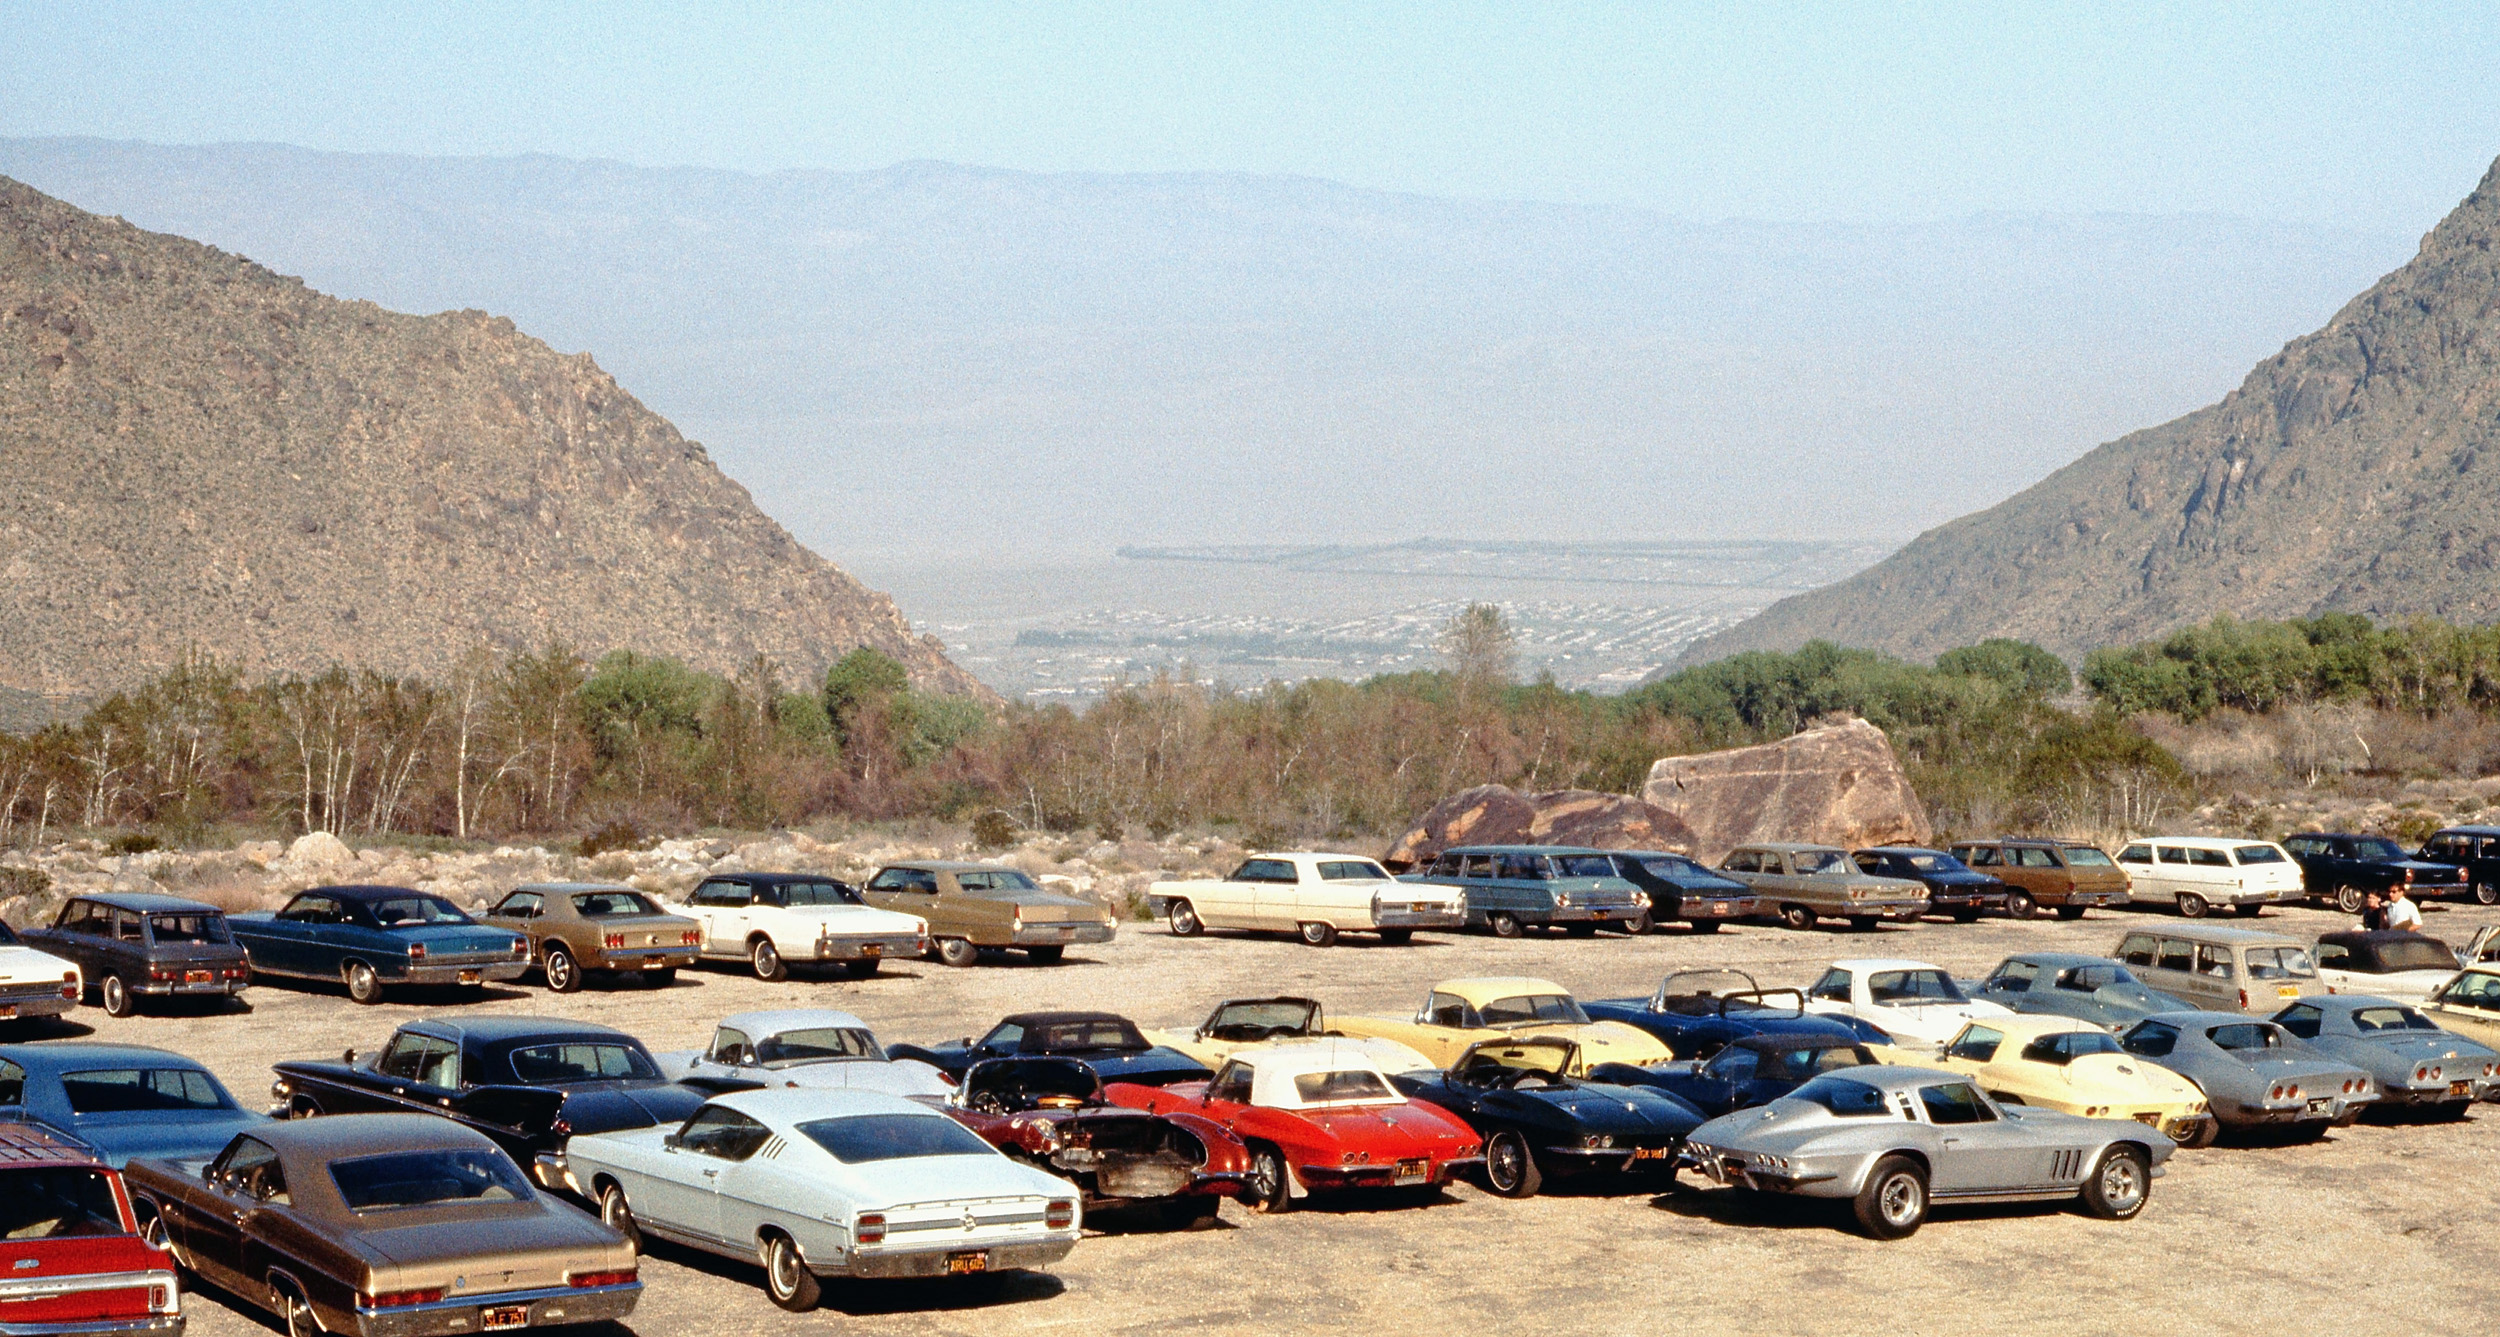 A shot of serendipity at the parking lot, base of the Palm Springs Aerial Tram, March 1969.  Has the view of the desert below changed much today? Love the spunk of the guy with the older Corvette, half of the rear fiberglass clip missing. View full size.